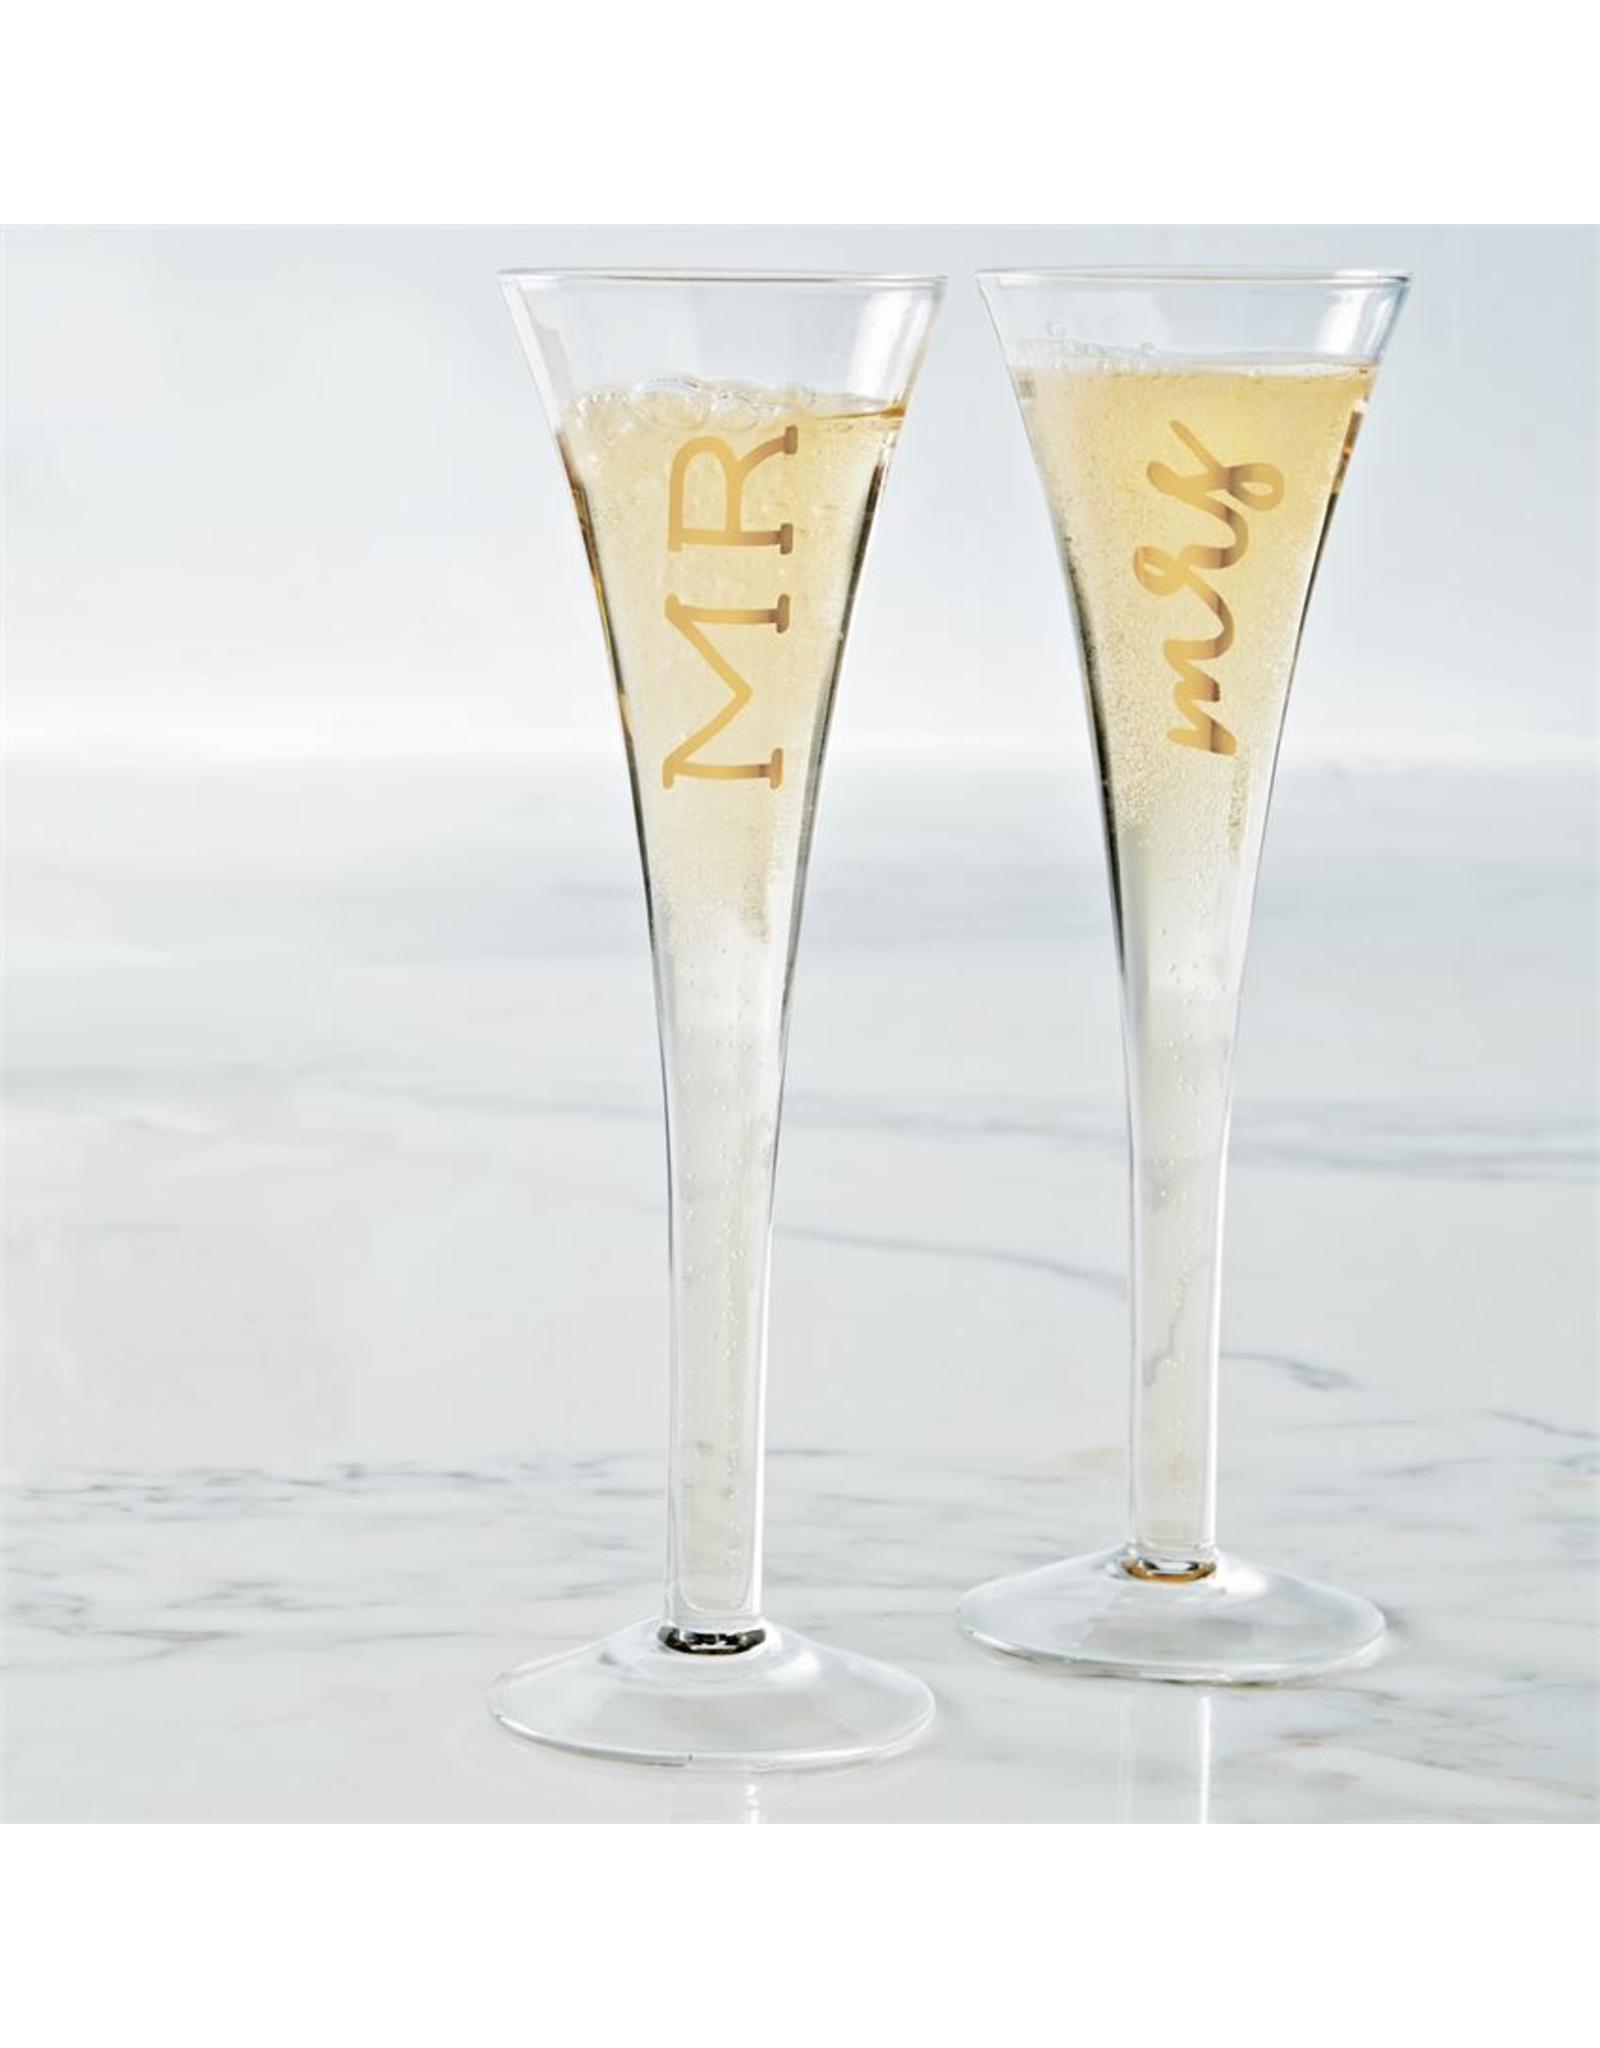 Mud Pie Mr And Mrs Champagne Glasses Set of 2 Champagne Flutes